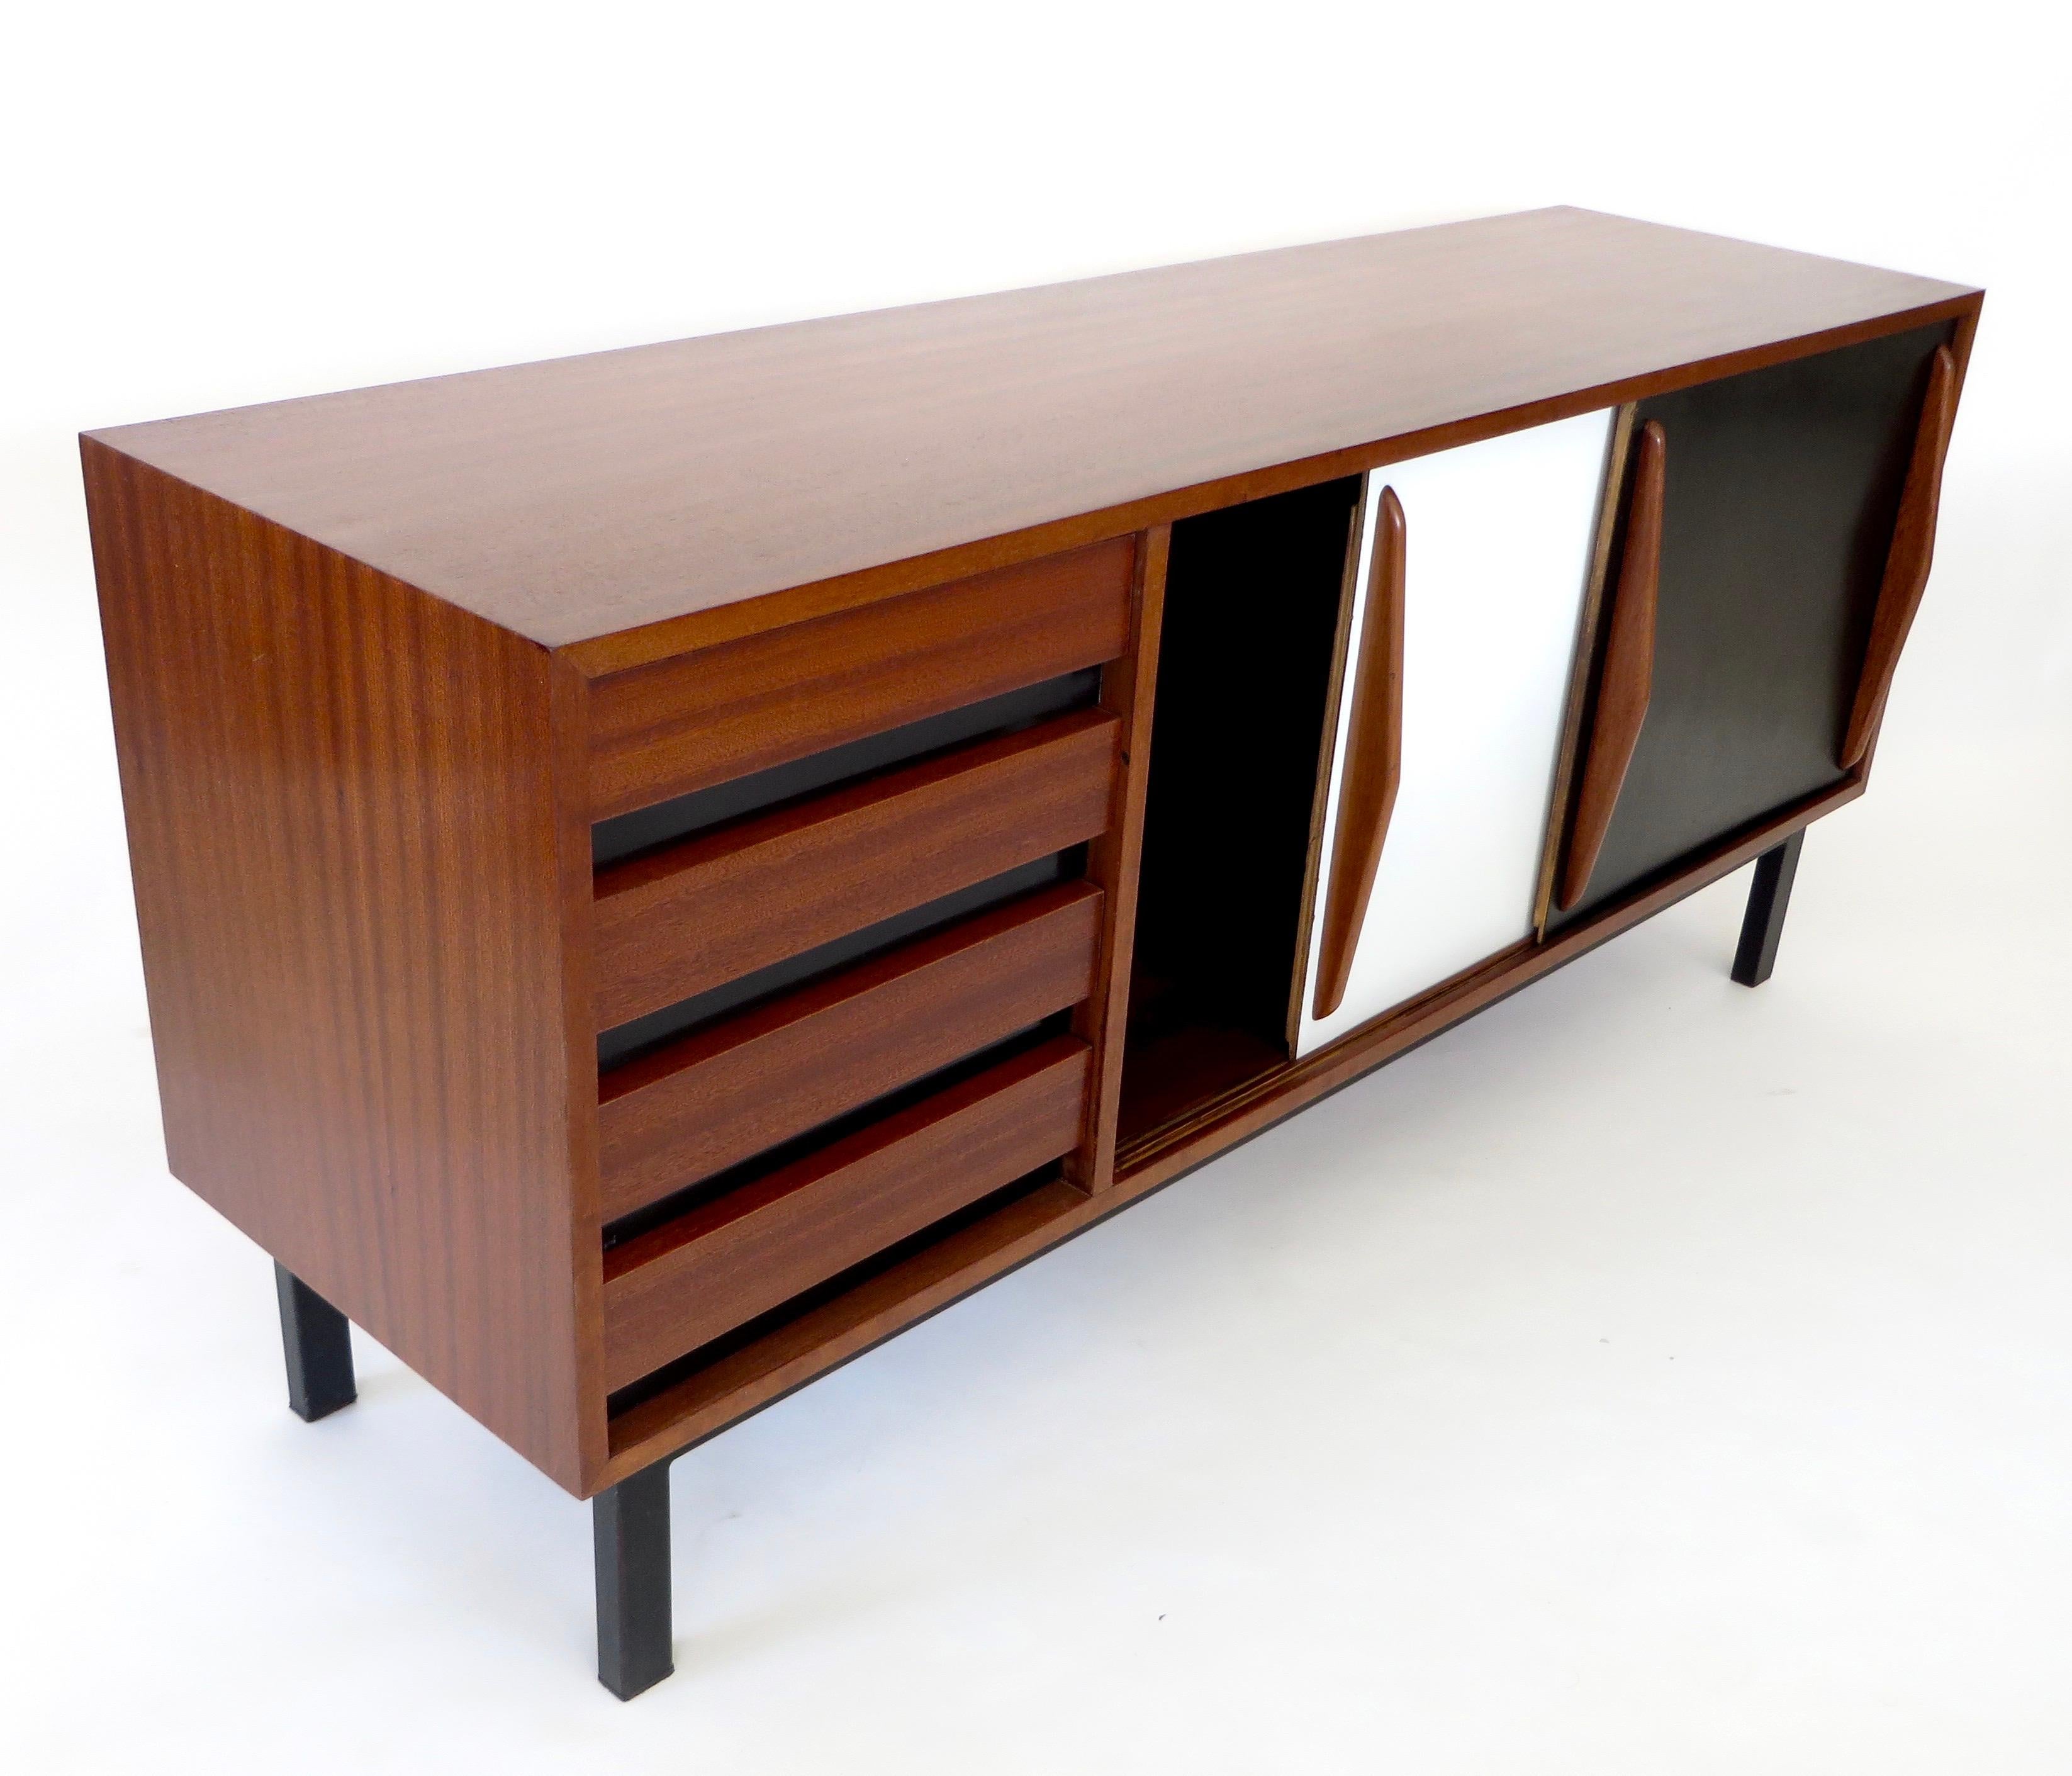 French Charlotte Perriand Cansado Mahoghany Sideboard